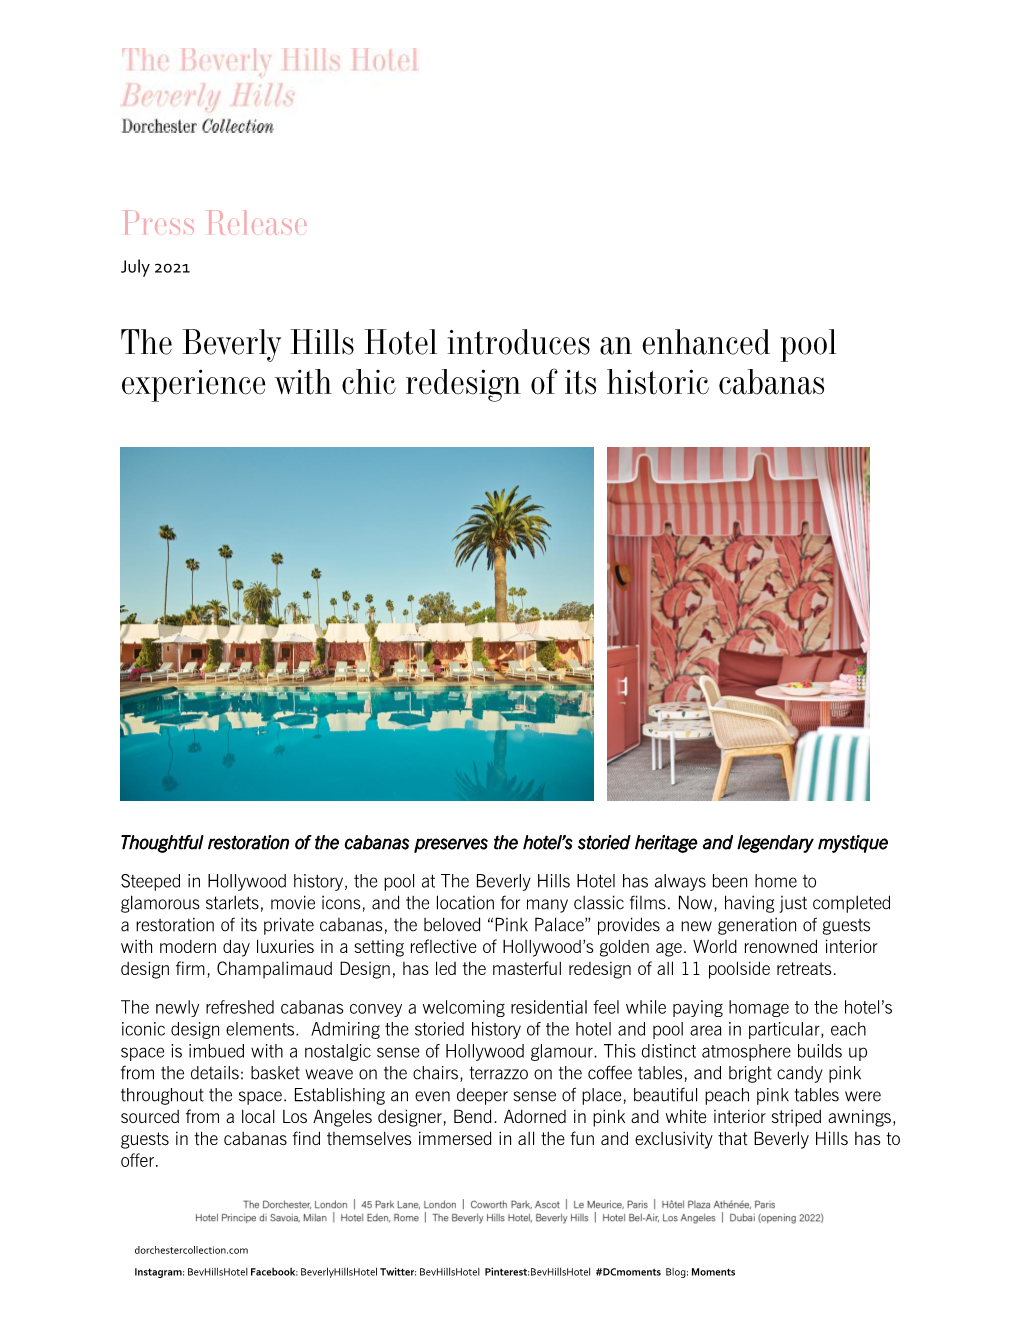 Press Release the Beverly Hills Hotel Introduces an Enhanced Pool